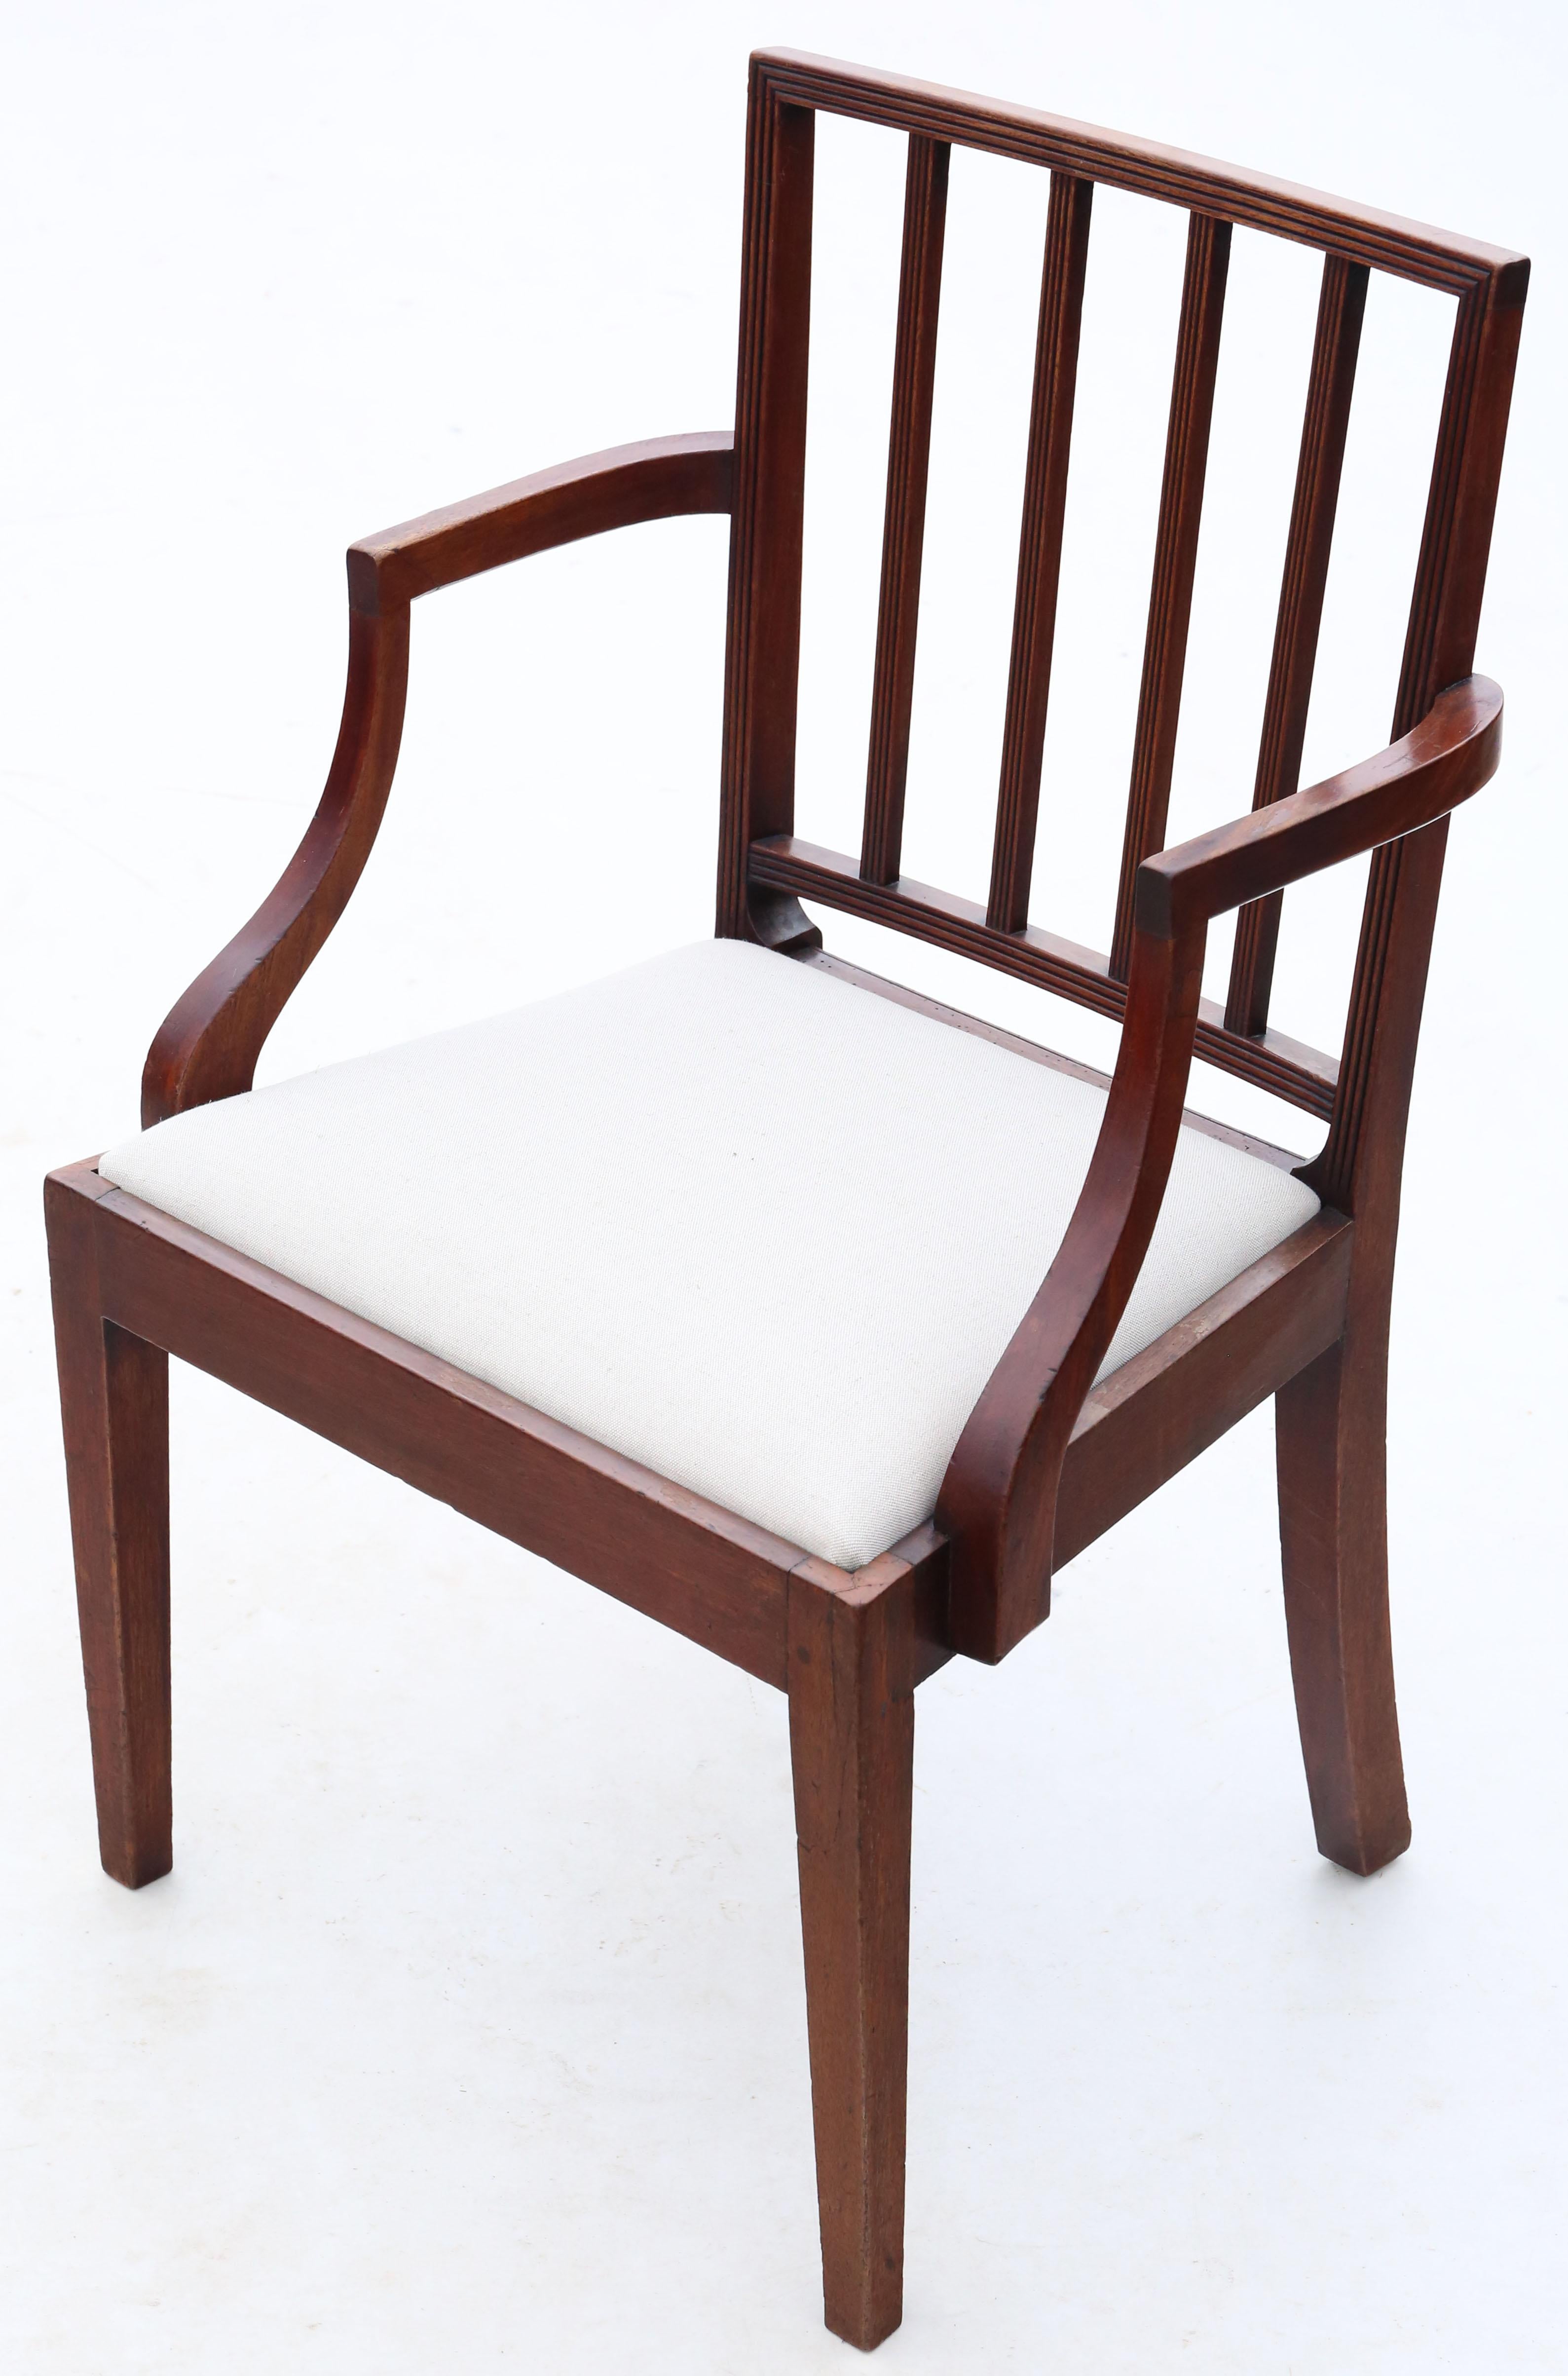 19th Century Mahogany Dining Chairs: Set of 8 (6+2), Antique Quality, C1820 For Sale